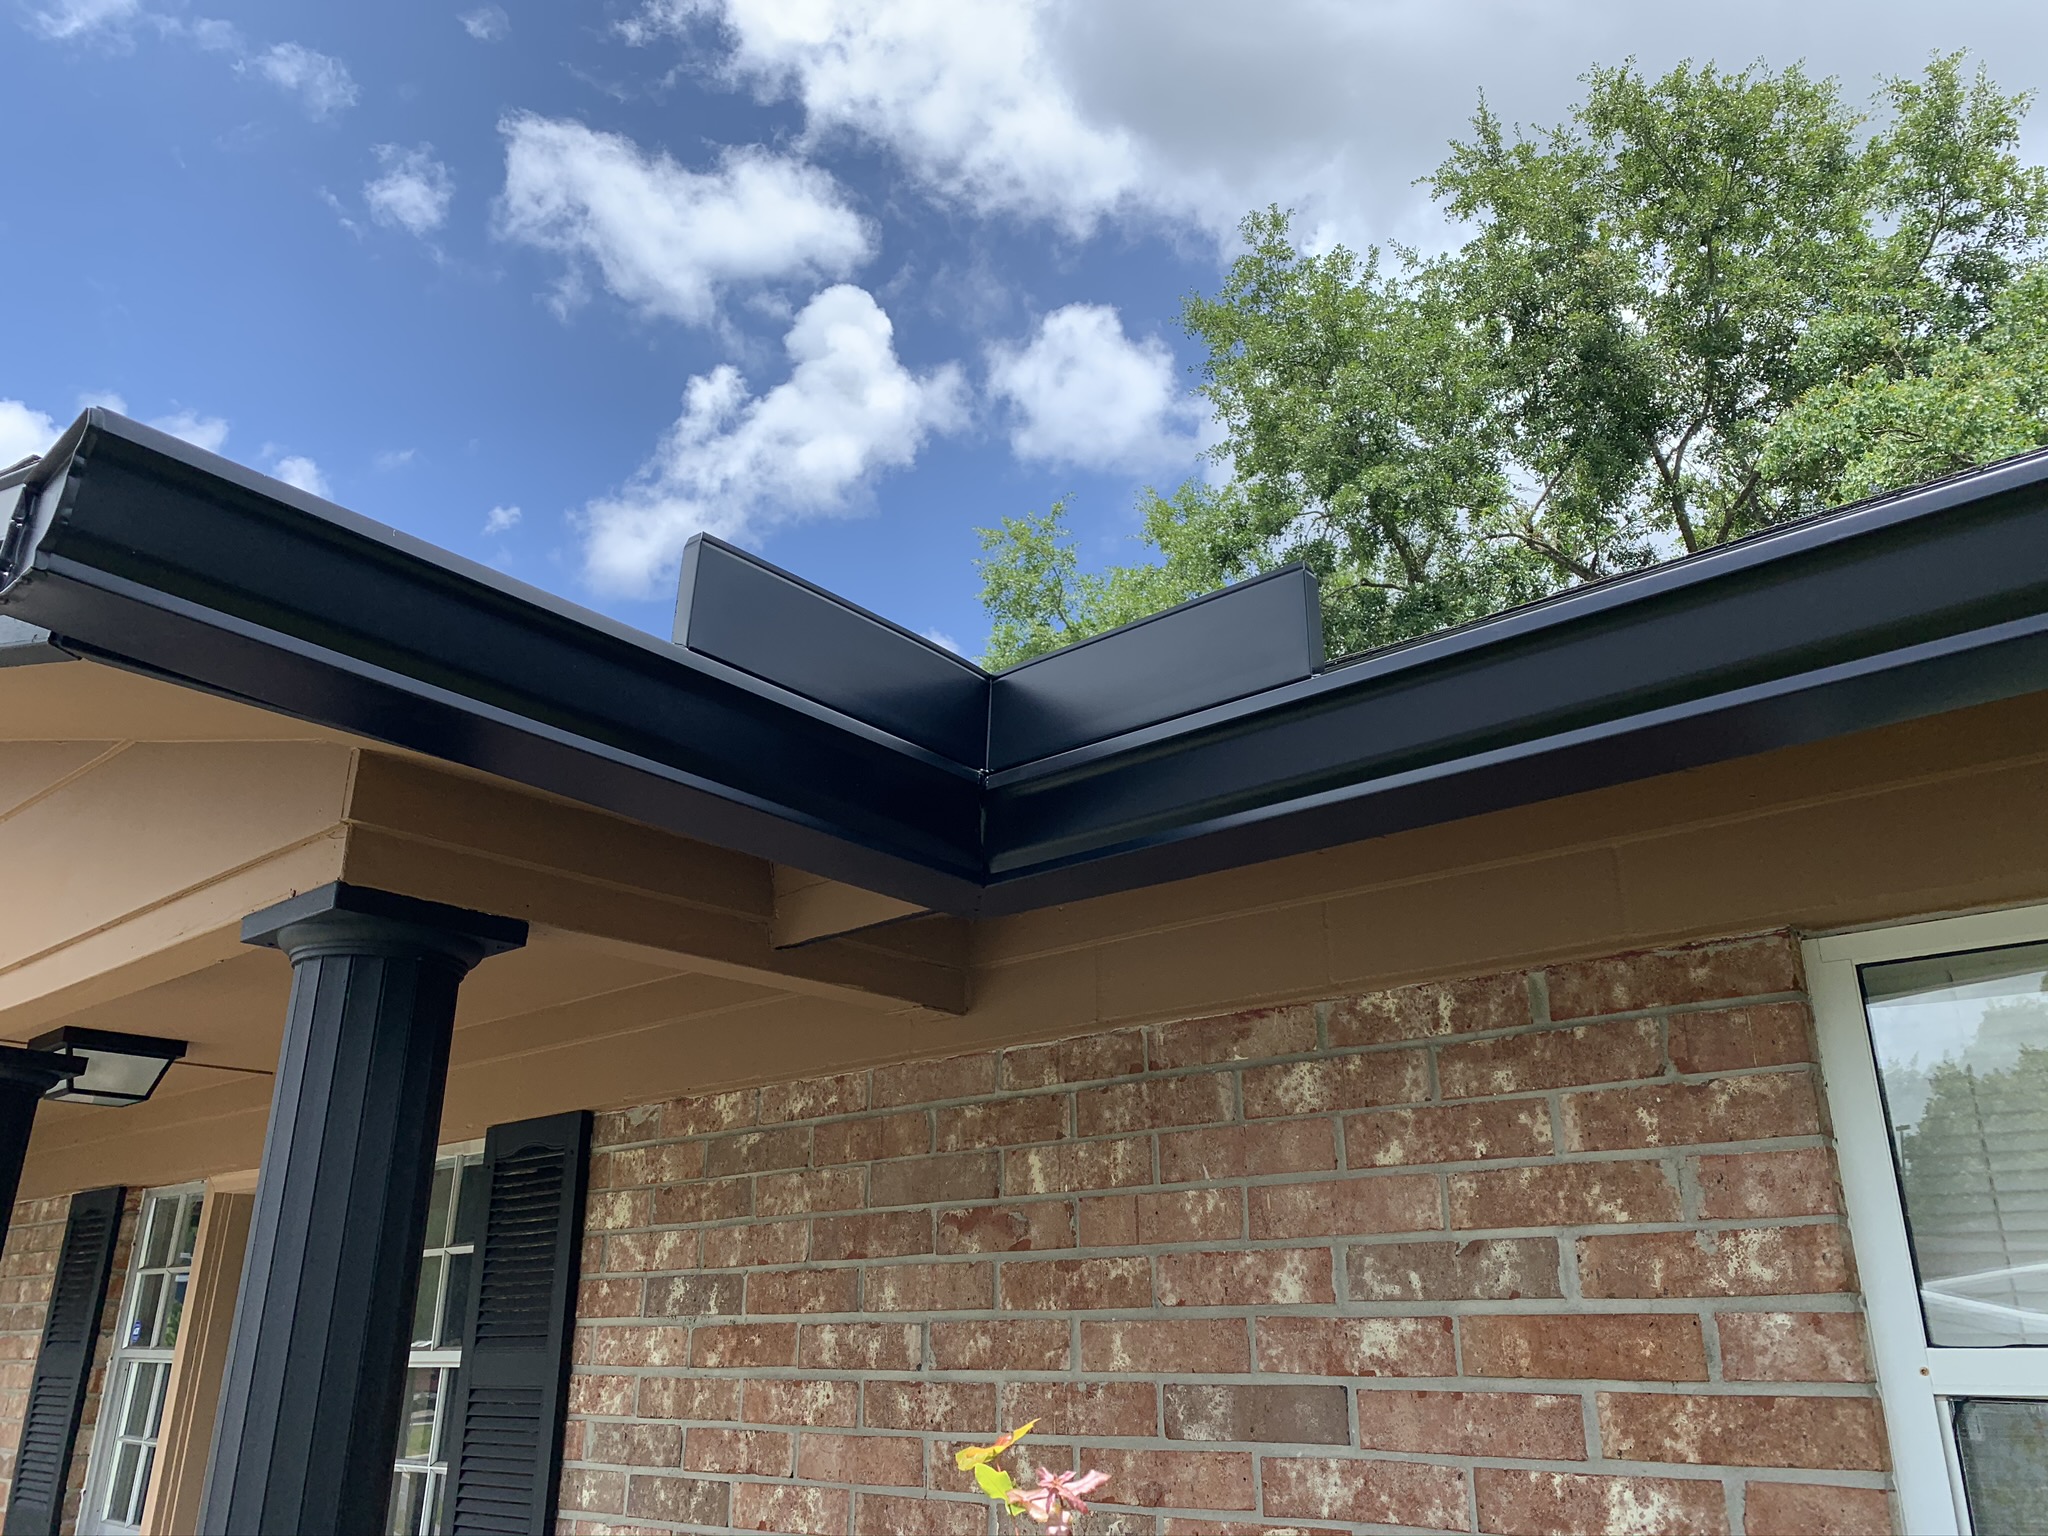 Masterful Gutter Installation Services in Jacksonville, Florida: Enhancing Homes and Protecting Investments